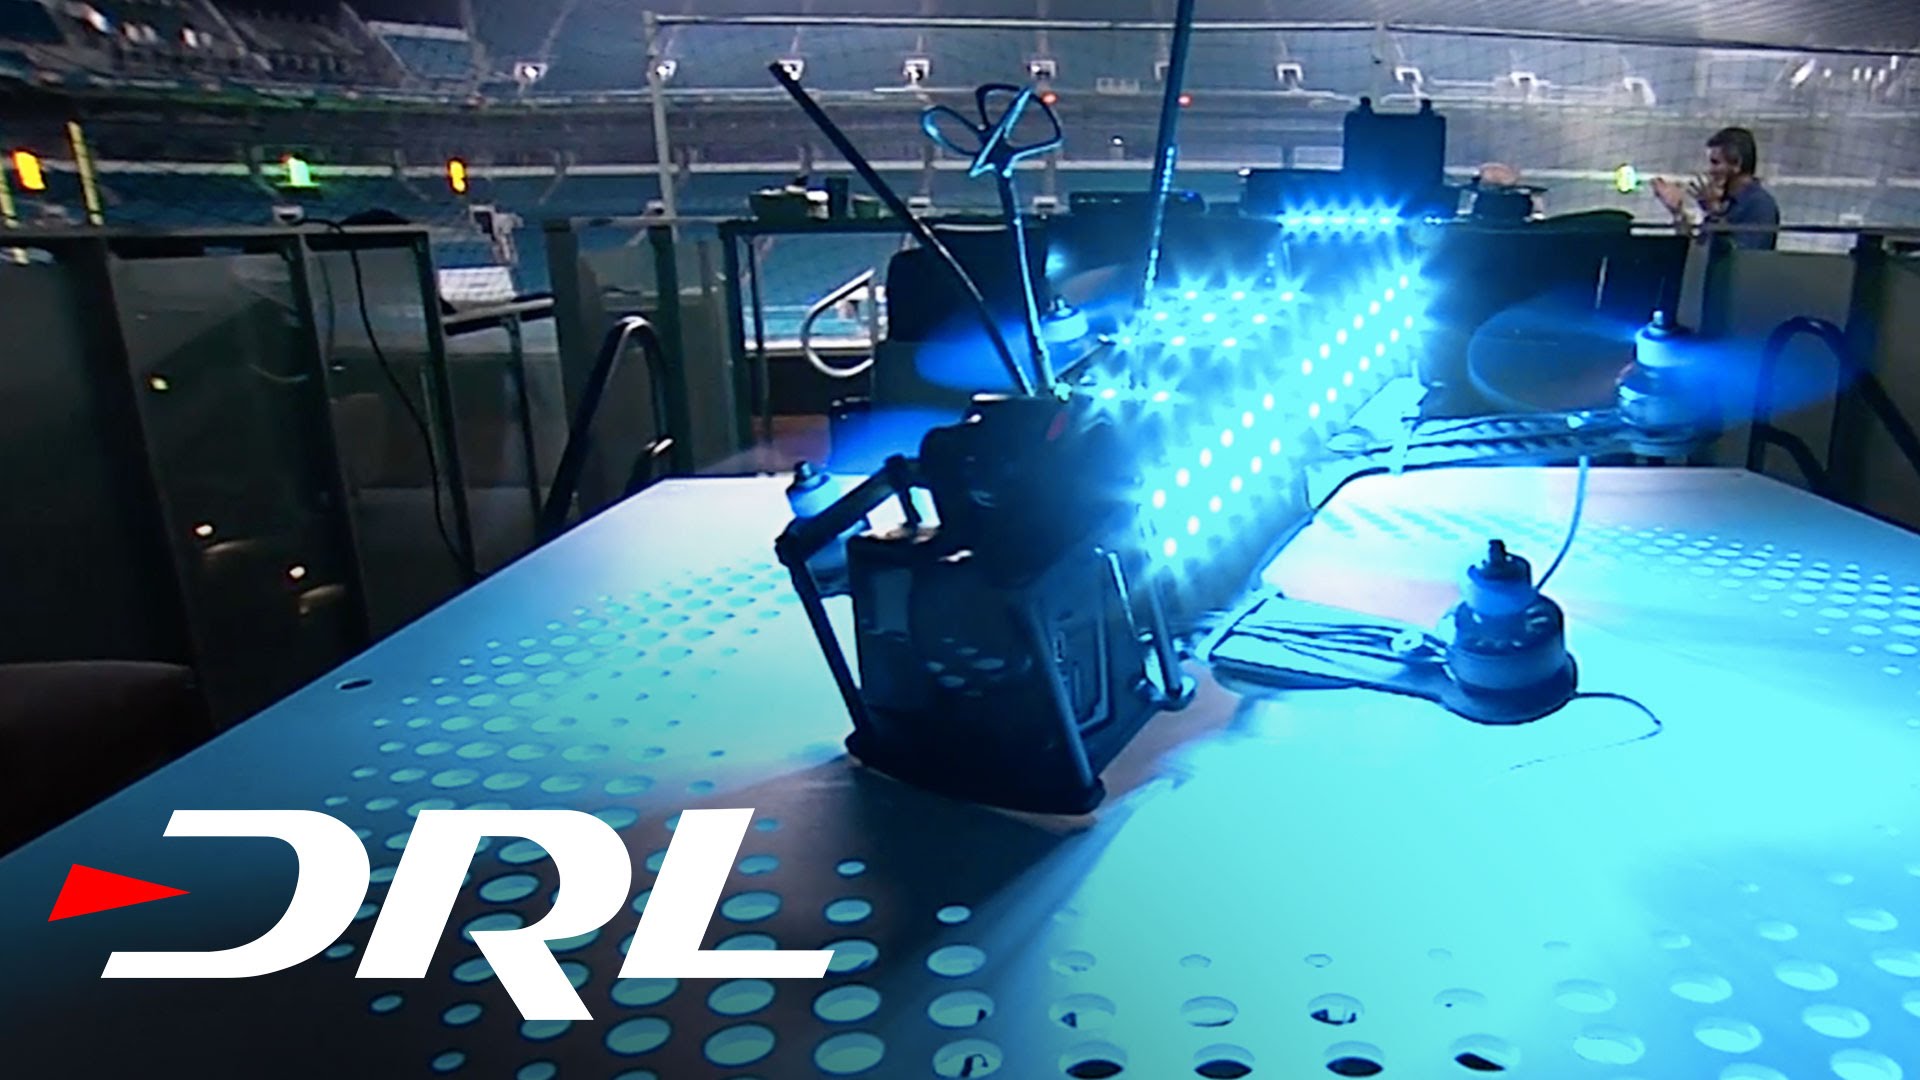 Drone Racing League 101: What are DRL Quadcopter Drones? | DRL